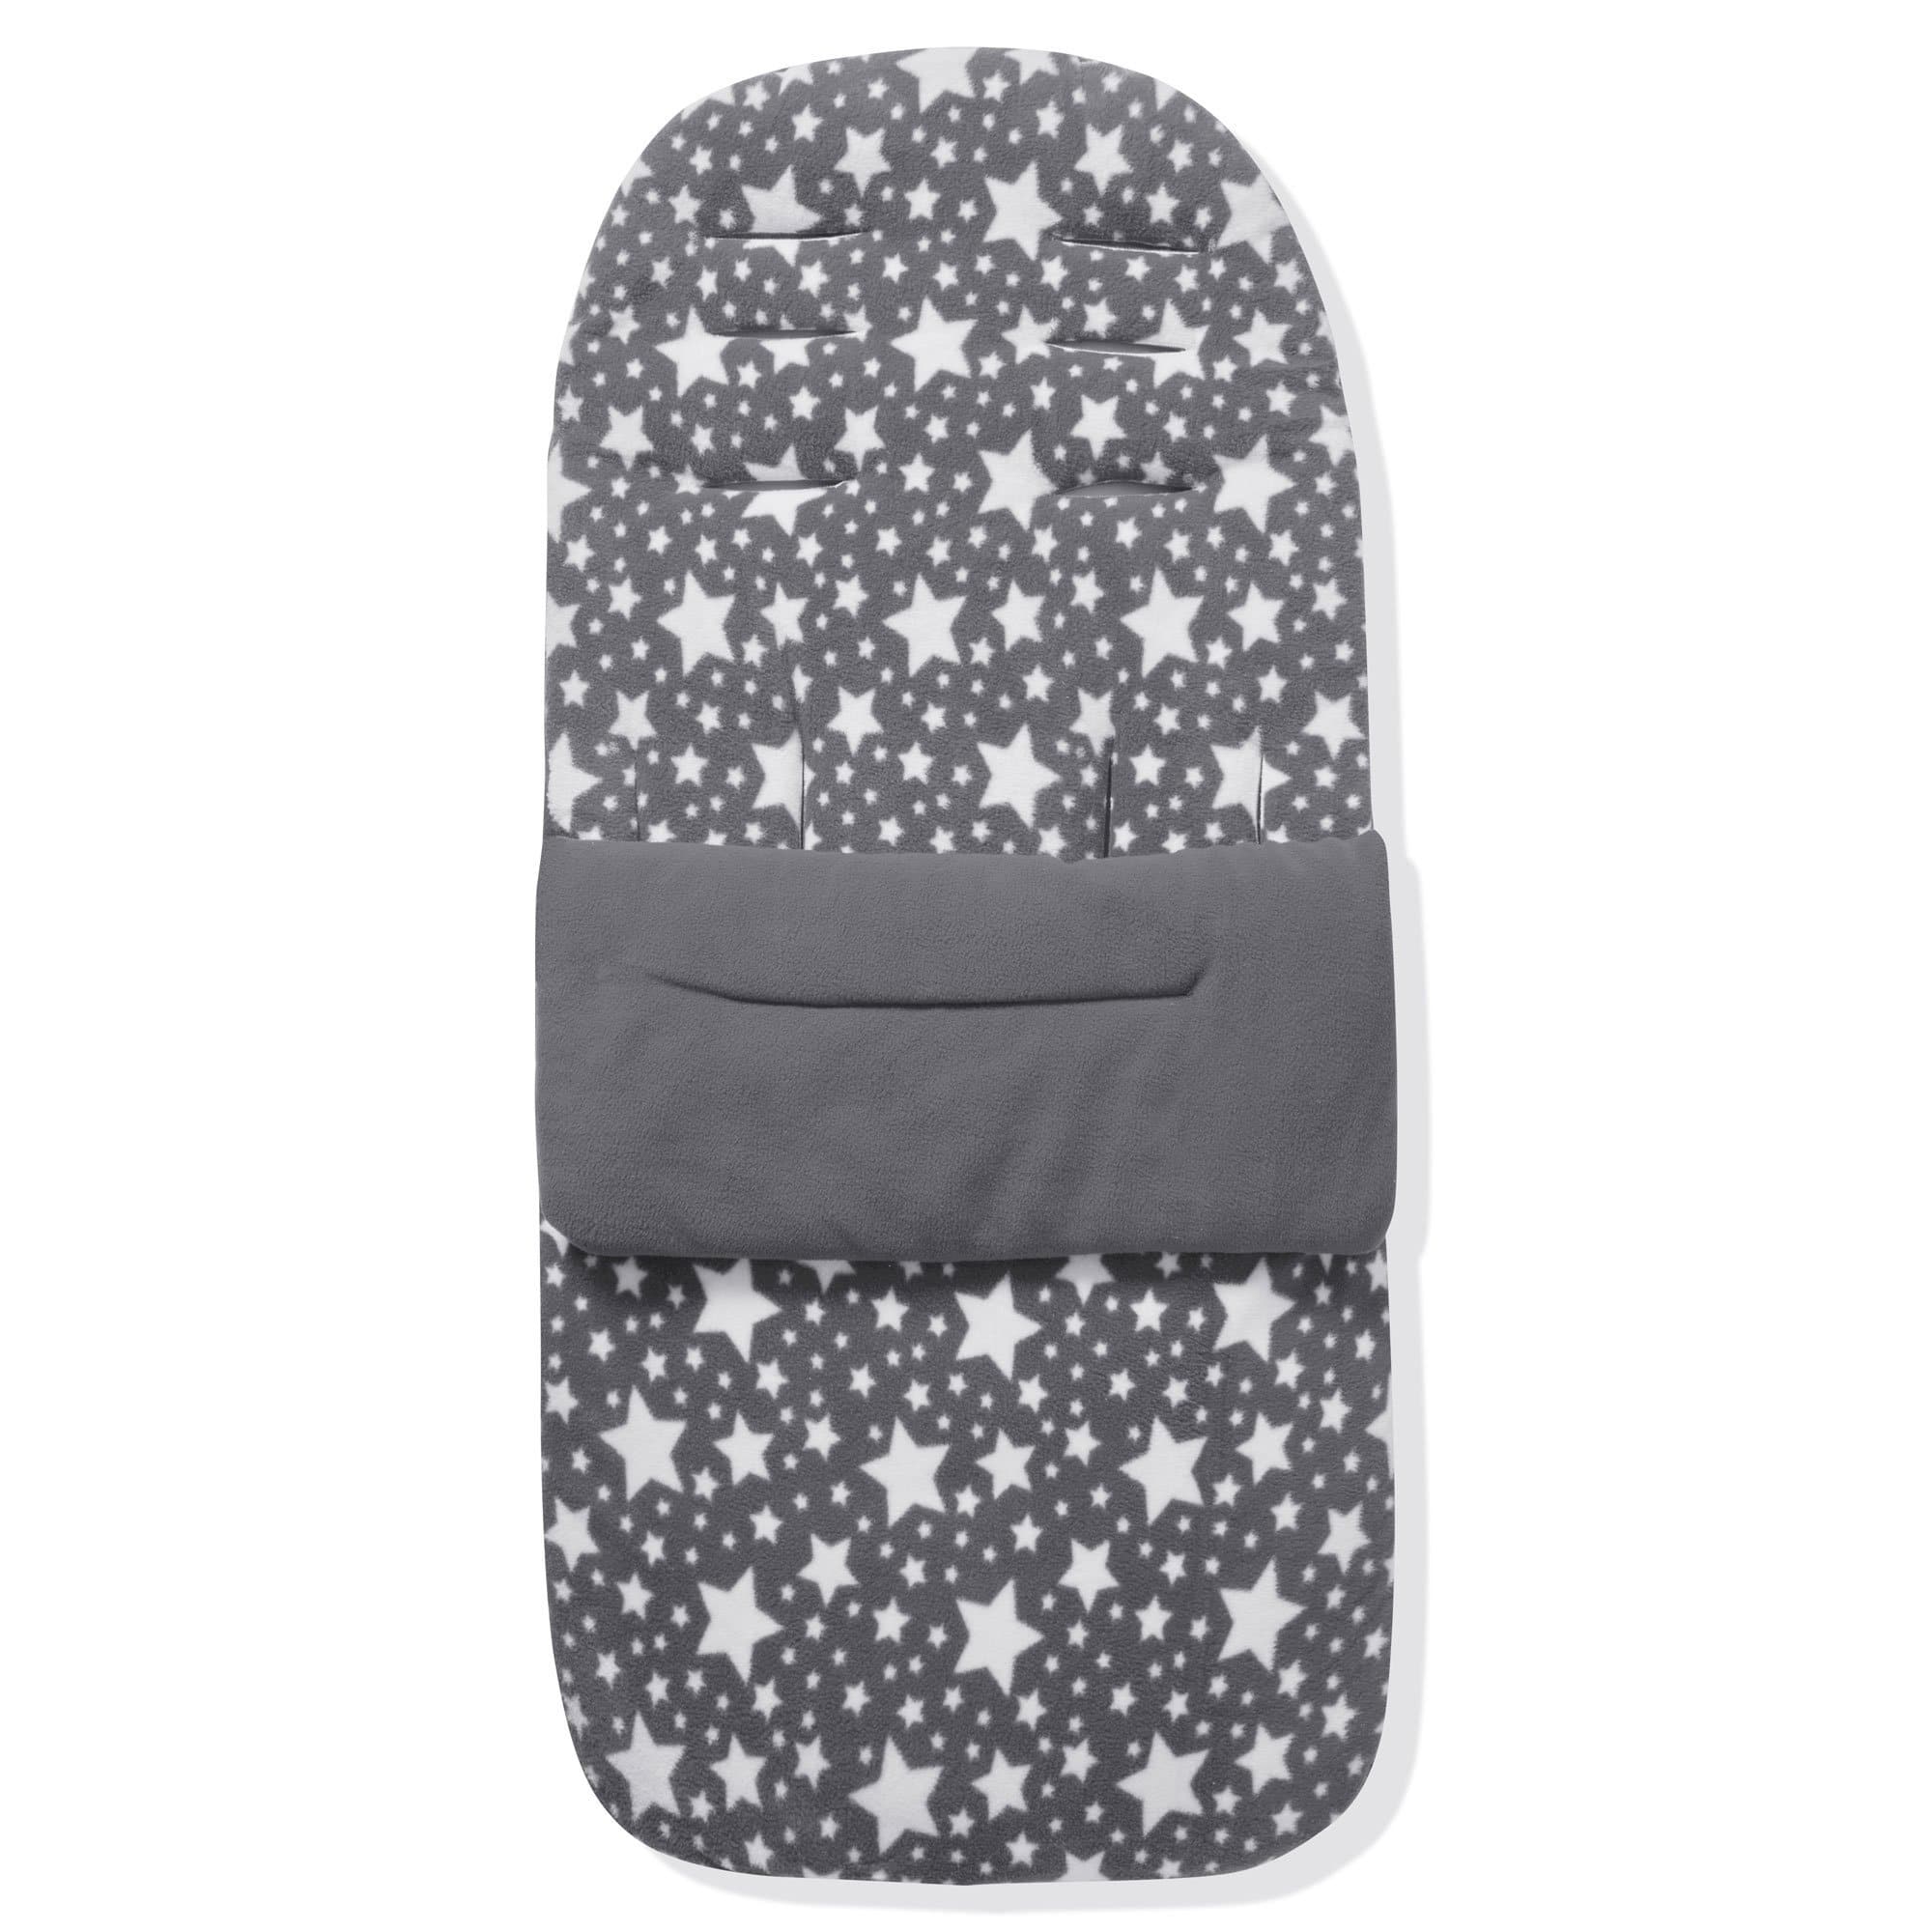 Fleece Footmuff / Cosy Toes Compatible With Brevi - Grey Star / Fits All Models | For Your Little One